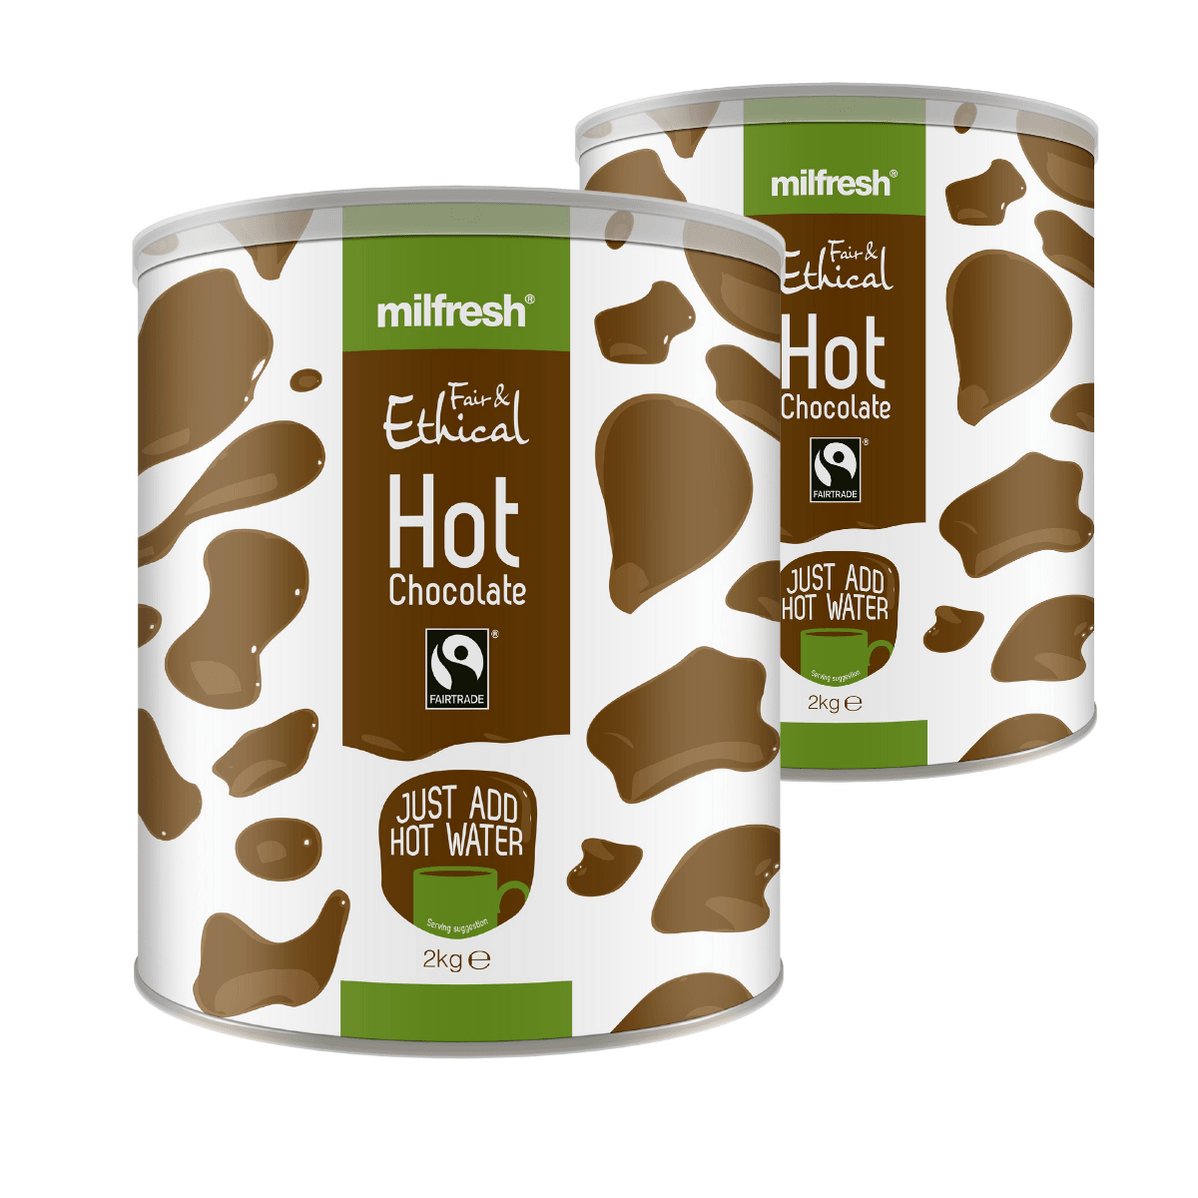 Milfresh Fair & Ethical Instant Hot Chocolate 2kg Tin (Add Hot Water) - Vending Superstore